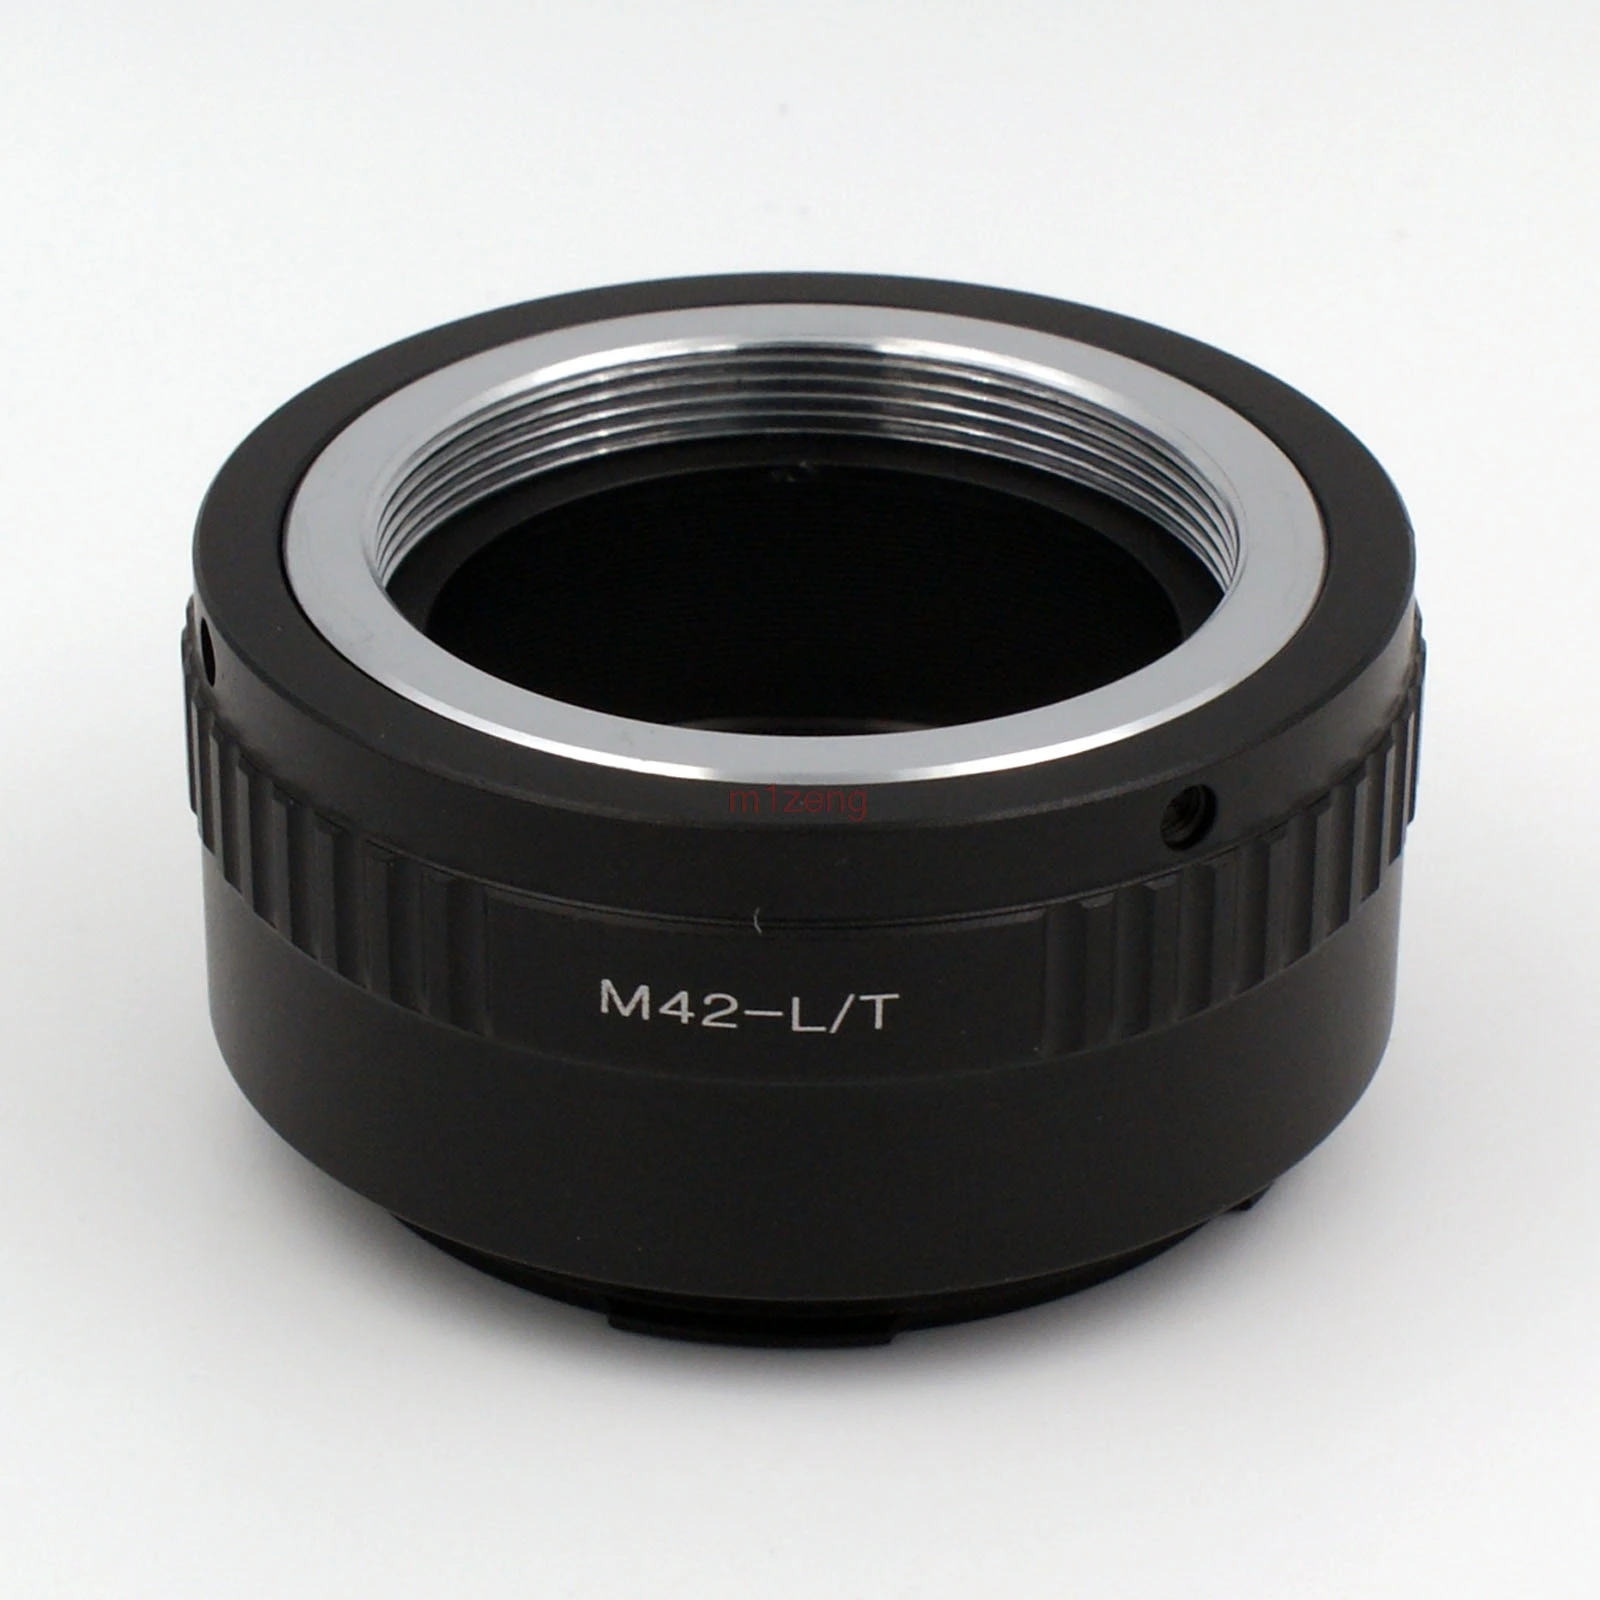 

M42-LT Adapter ring for M42 42mm mount lens to Leica T LT TL TL2 SL CL Typ701 18146 18147 panasonic S1H/R s5 sigma fp camera